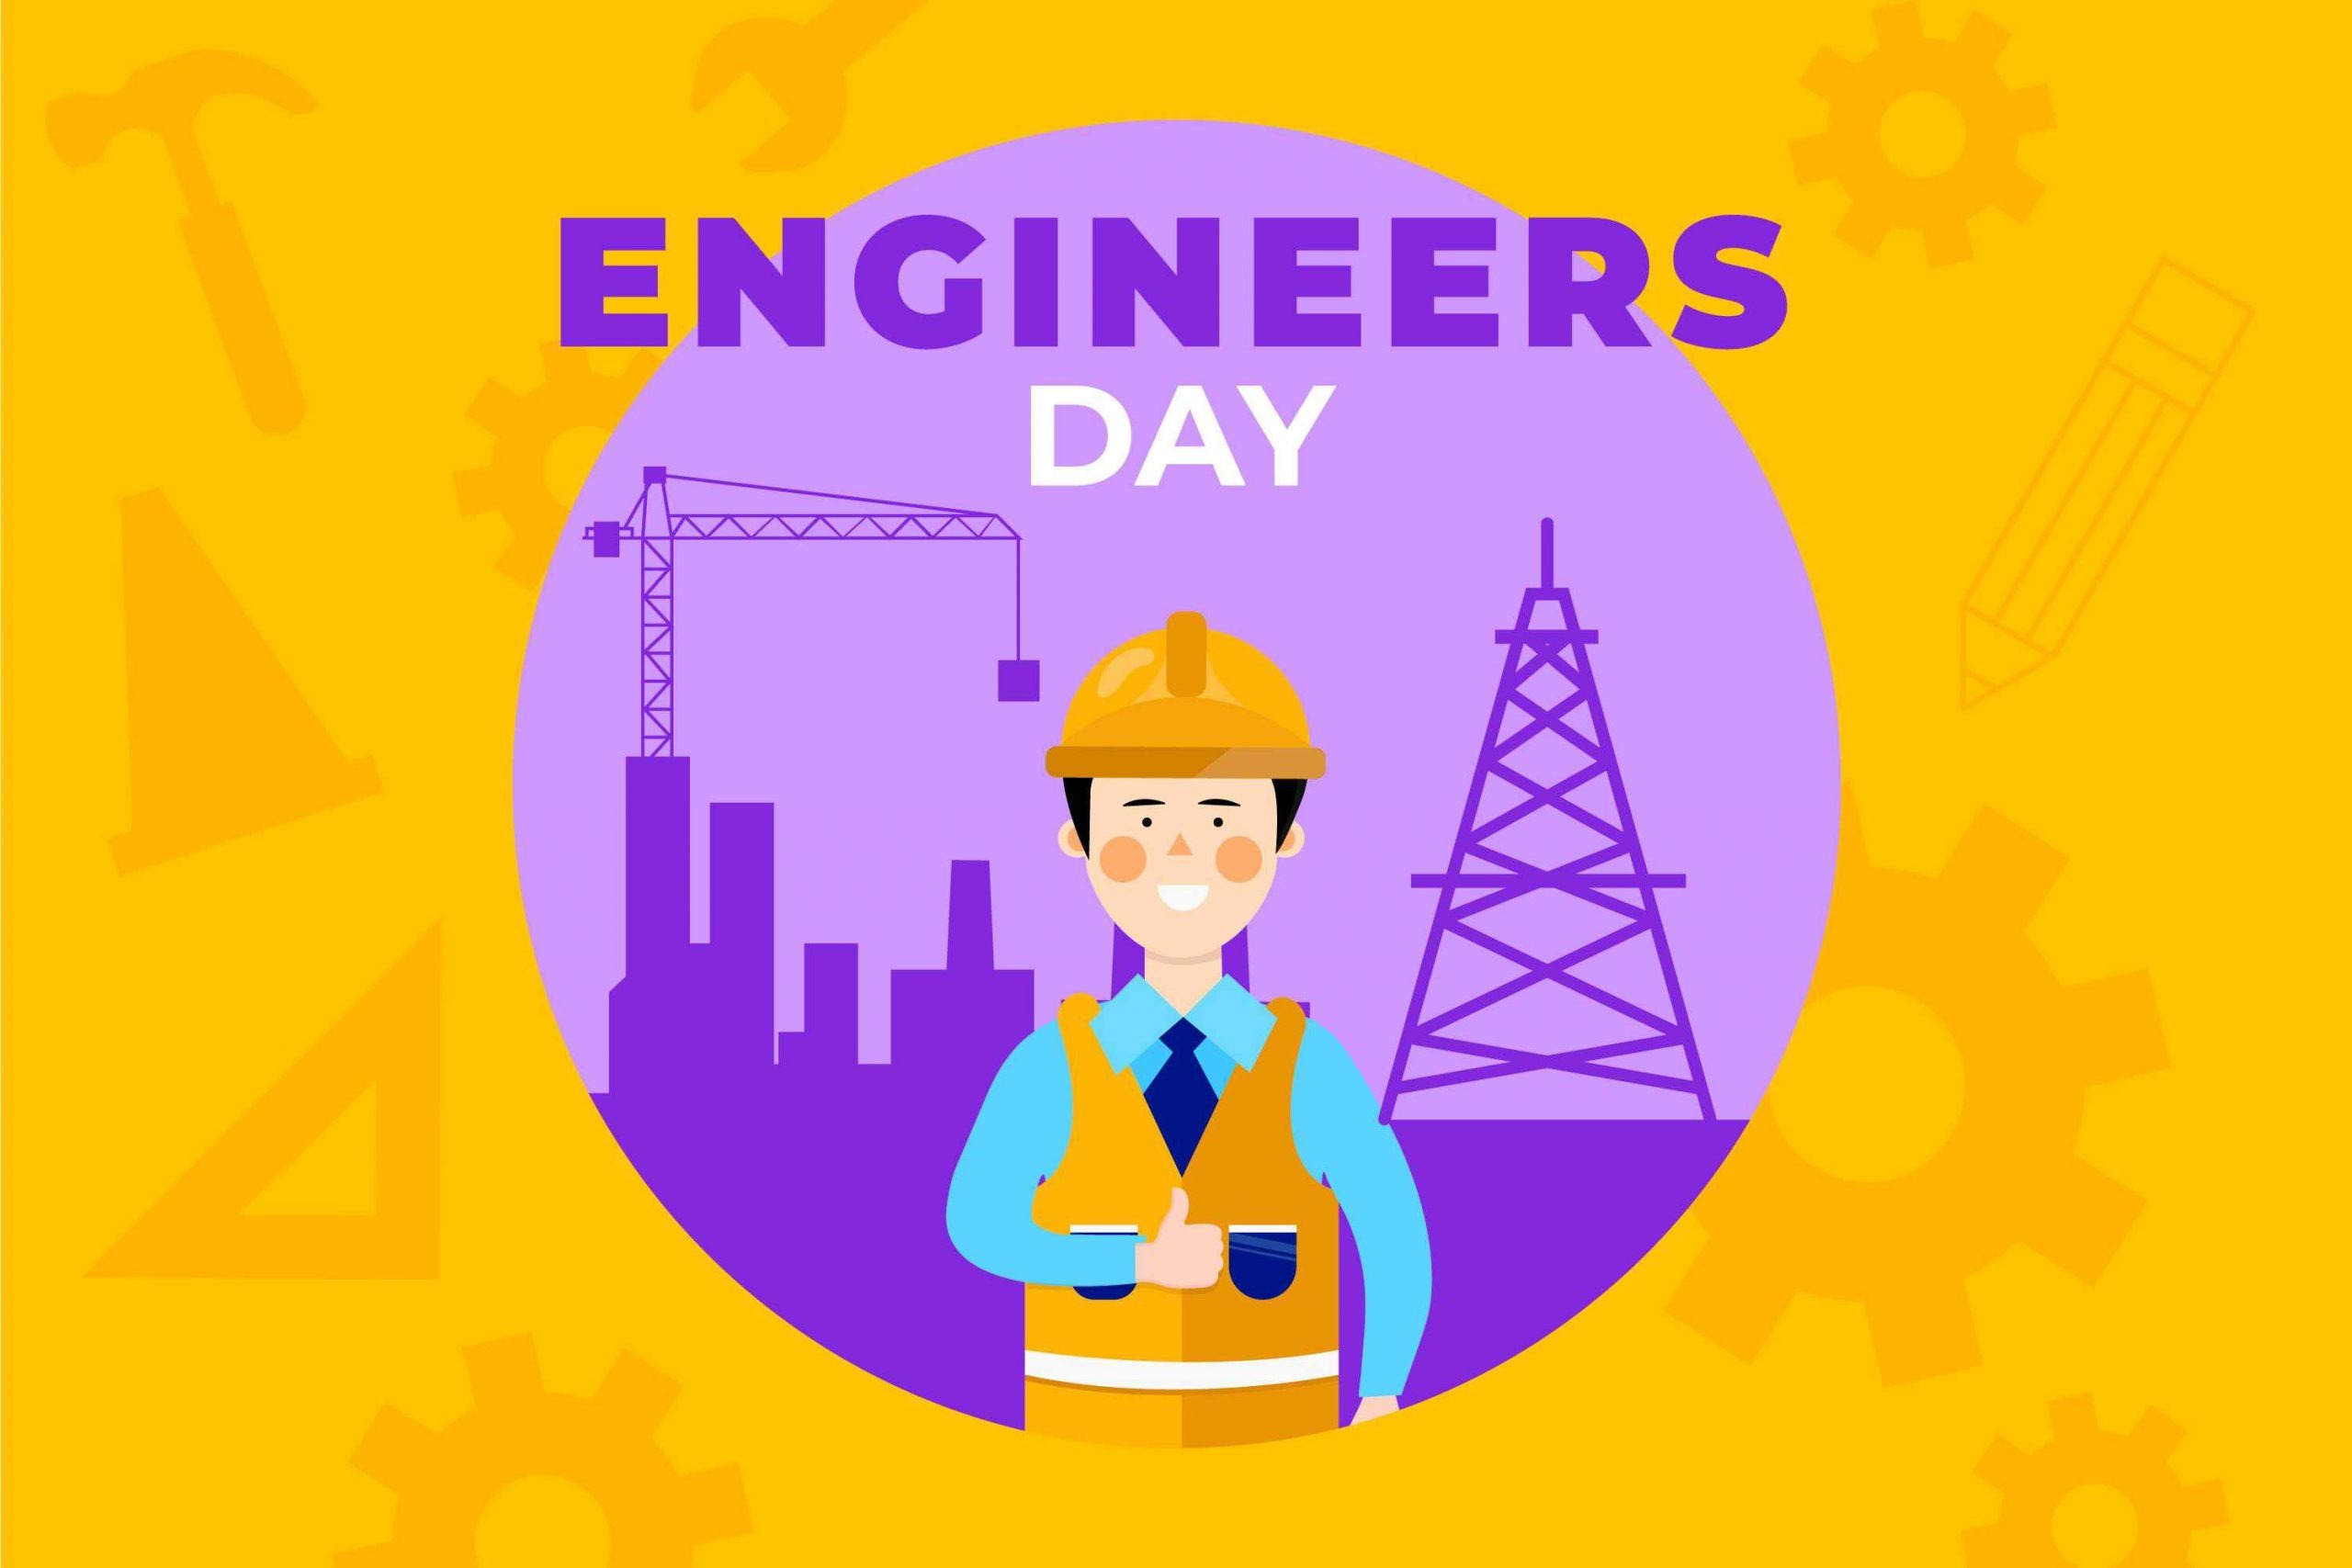 Happy Engineer's Day photo download